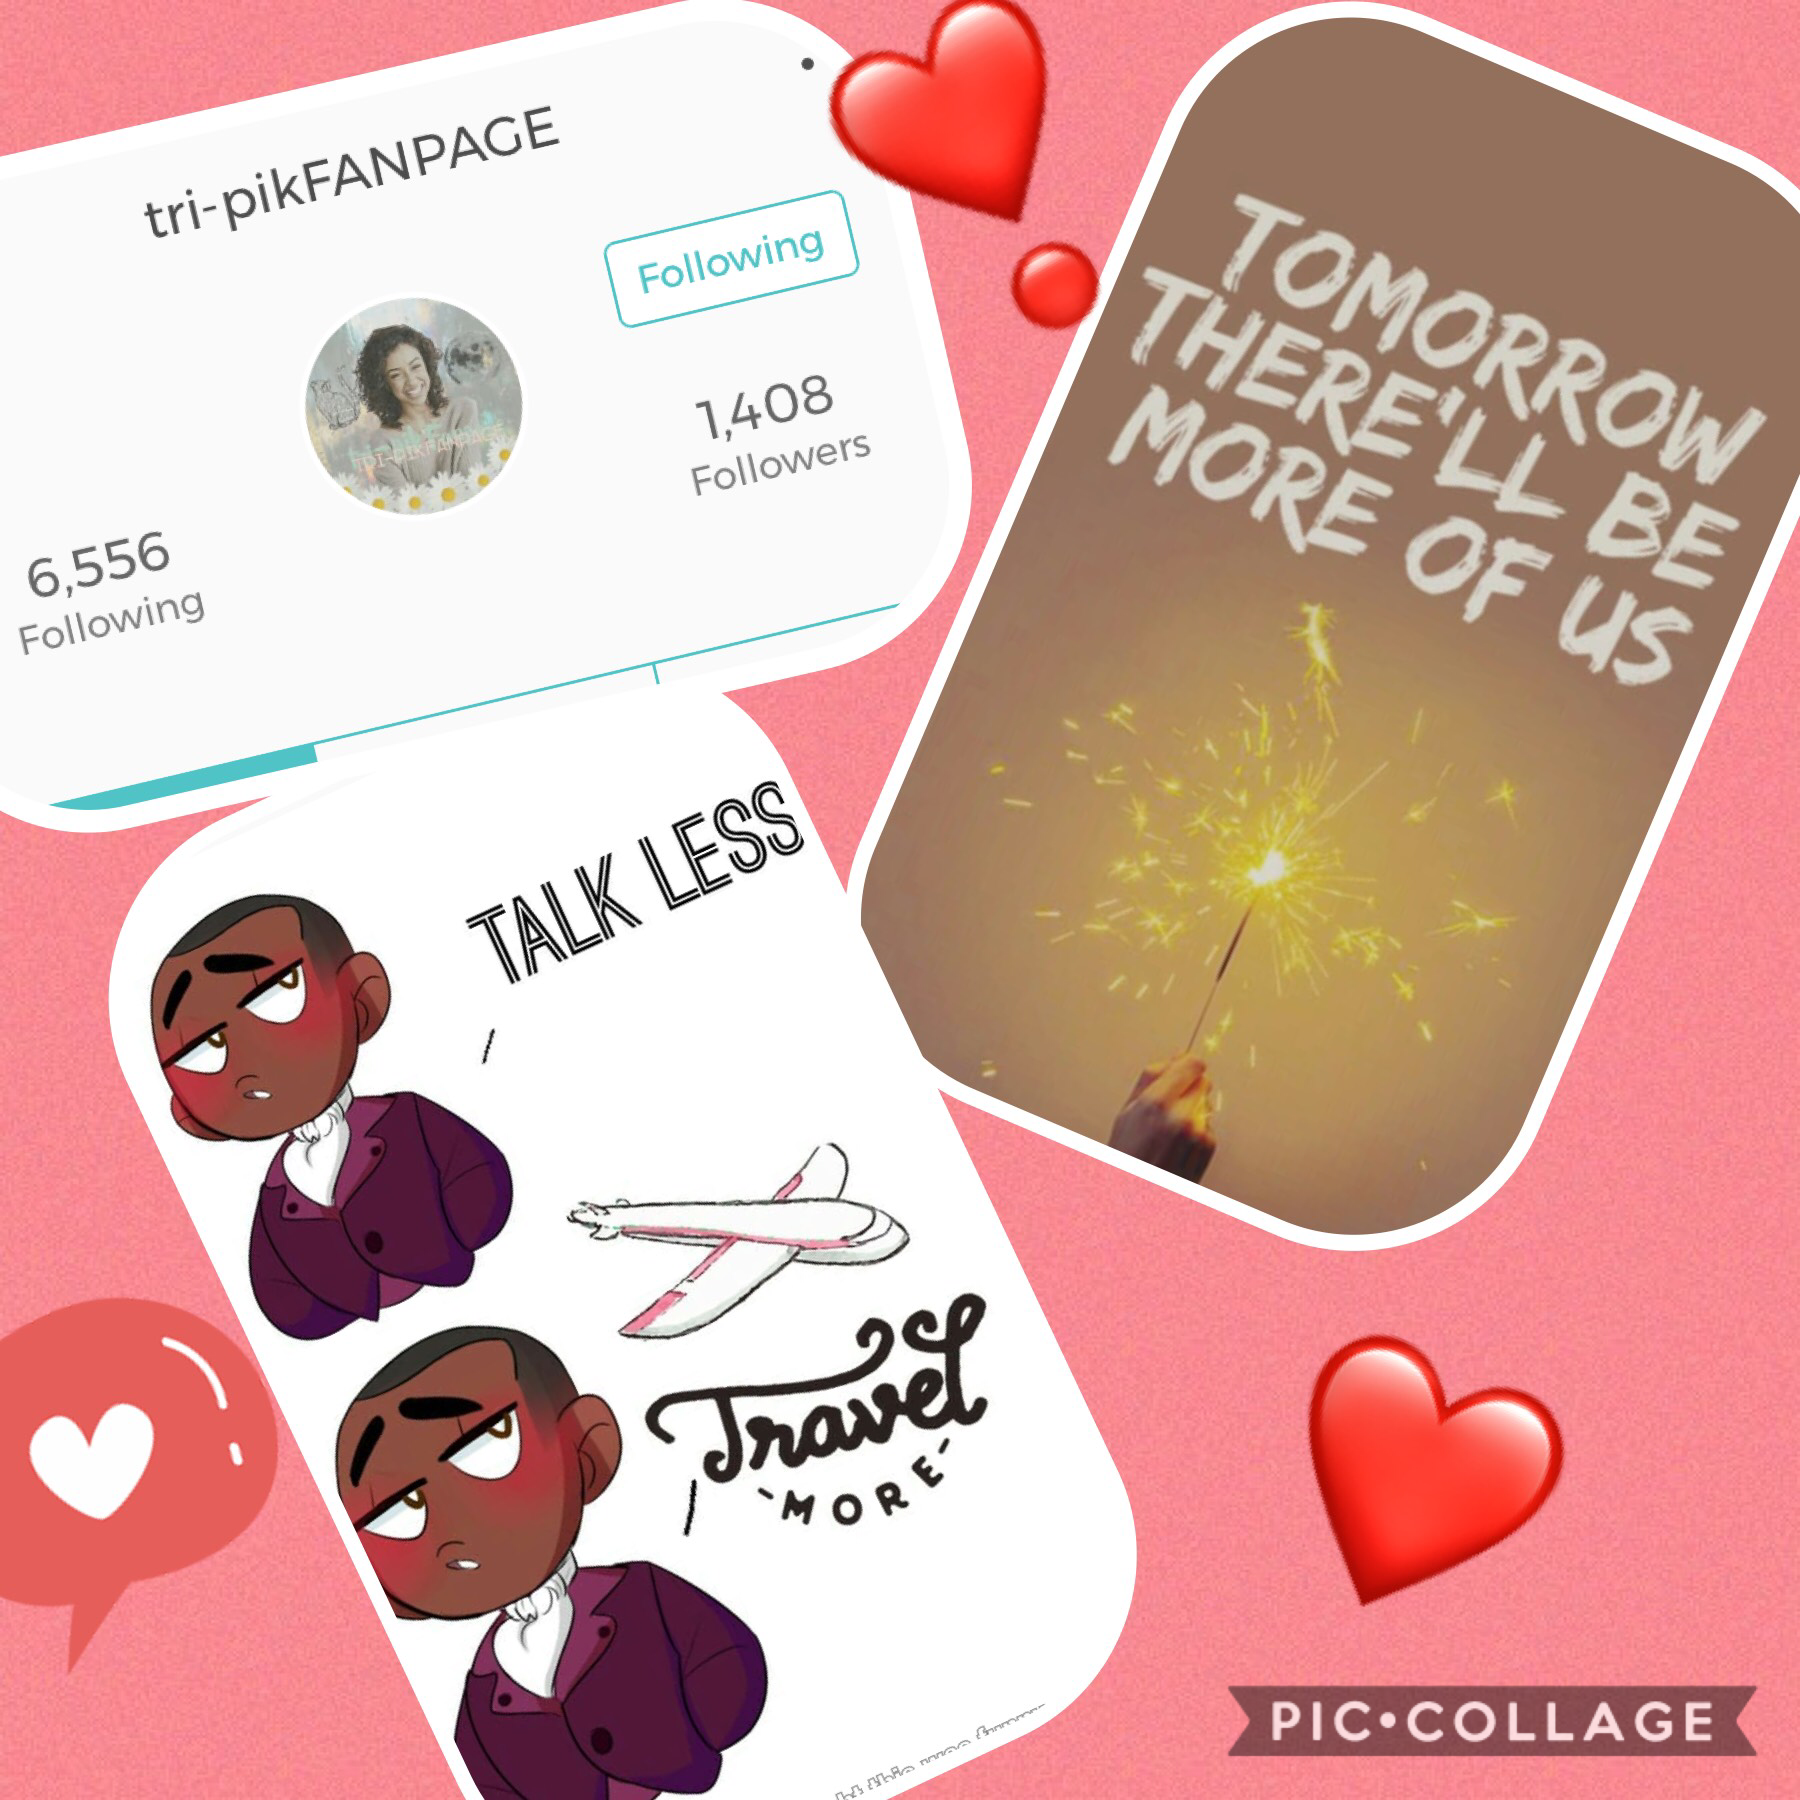 😁Tap😁

You are also AMAZING!! I love you collages❣️

P.S. I am also a Hamilton fan! The show is amazing😁